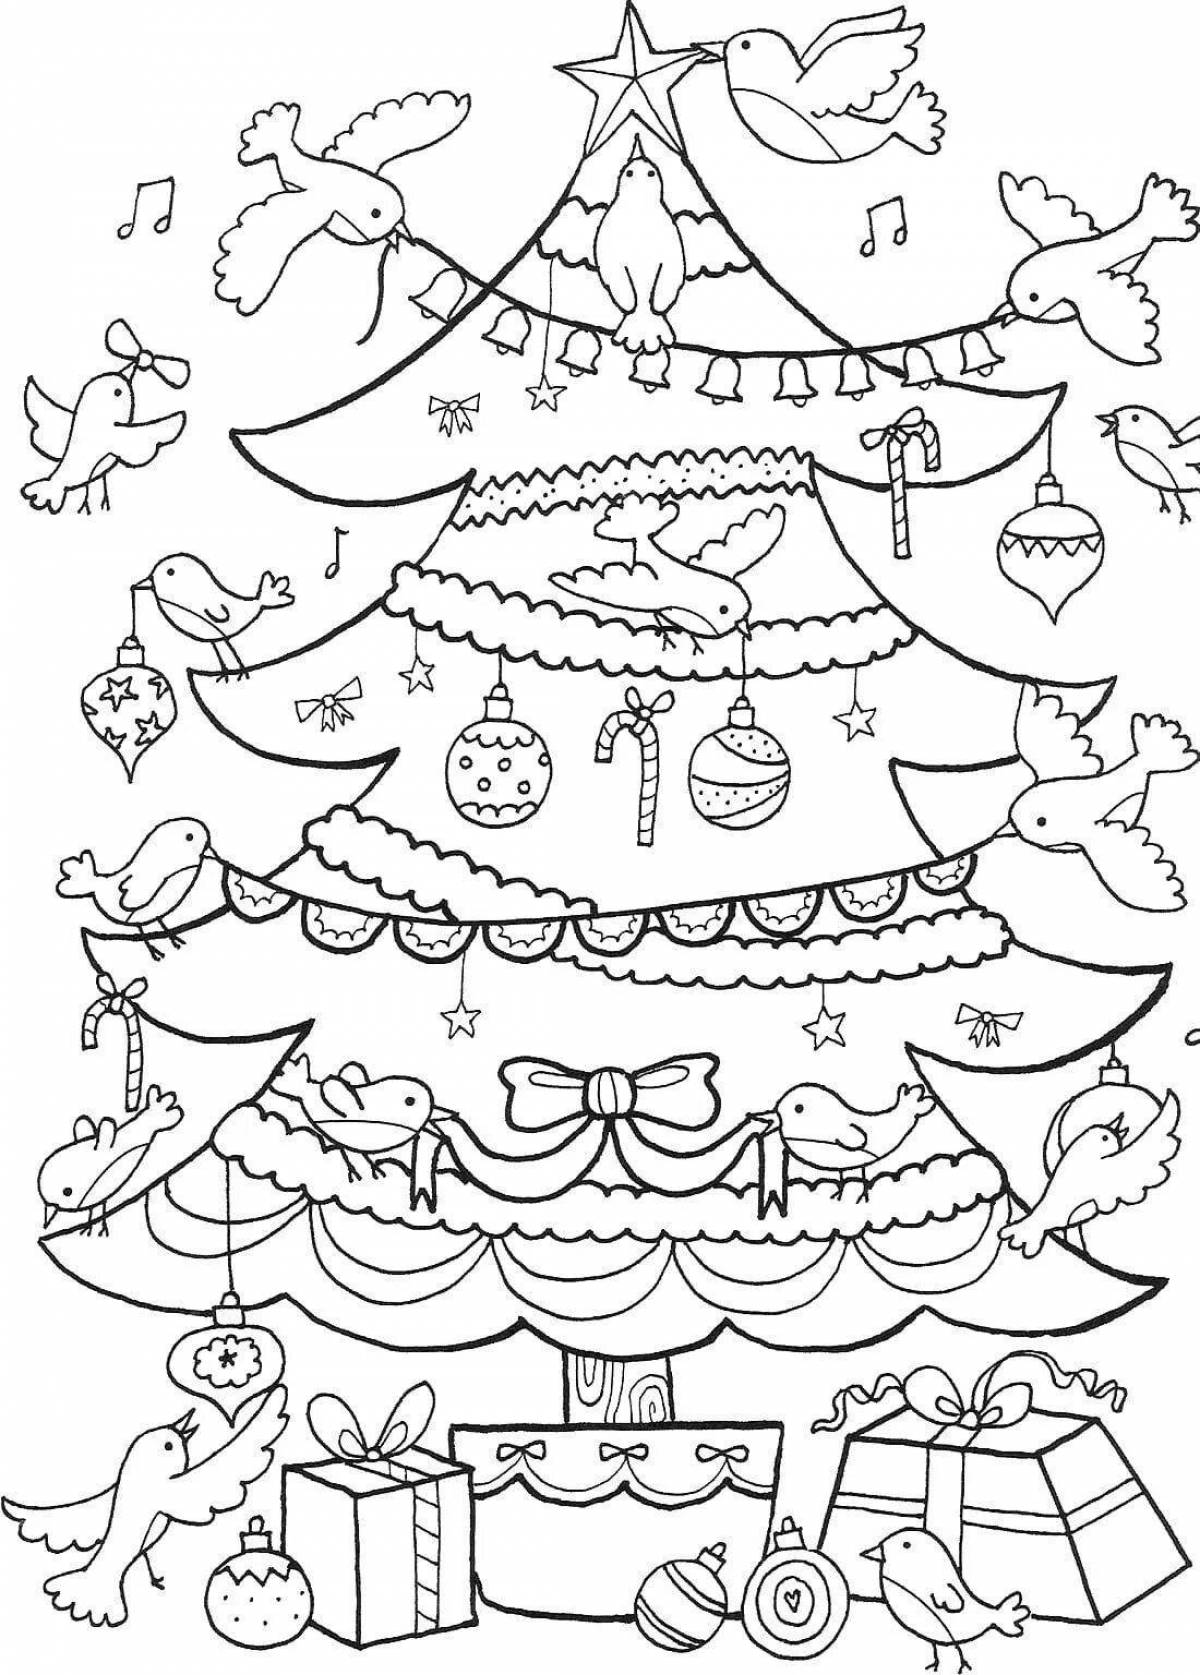 Christmas tree bright coloring for kids